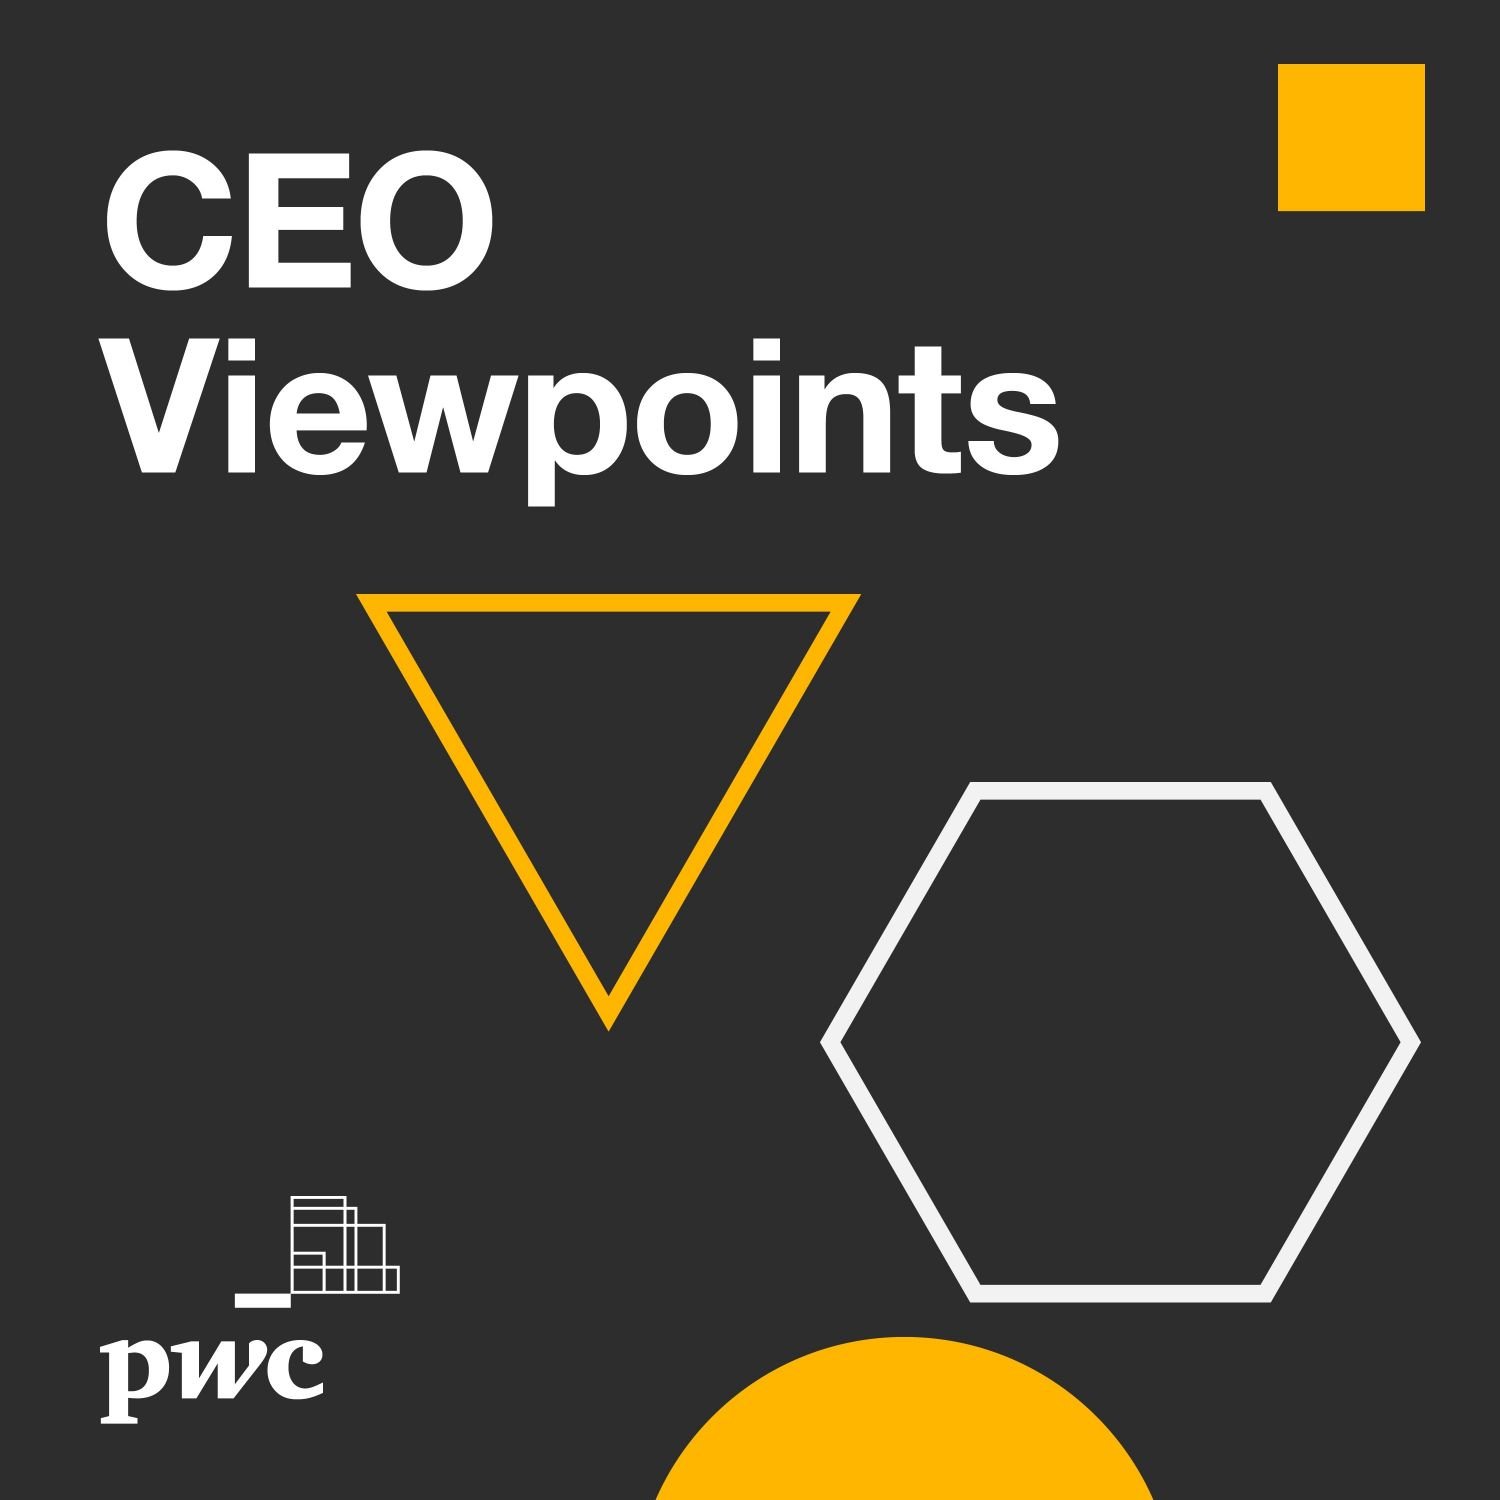 CEO Viewpoints Episode 6: The role of culture in navigating cybersecurity challenges